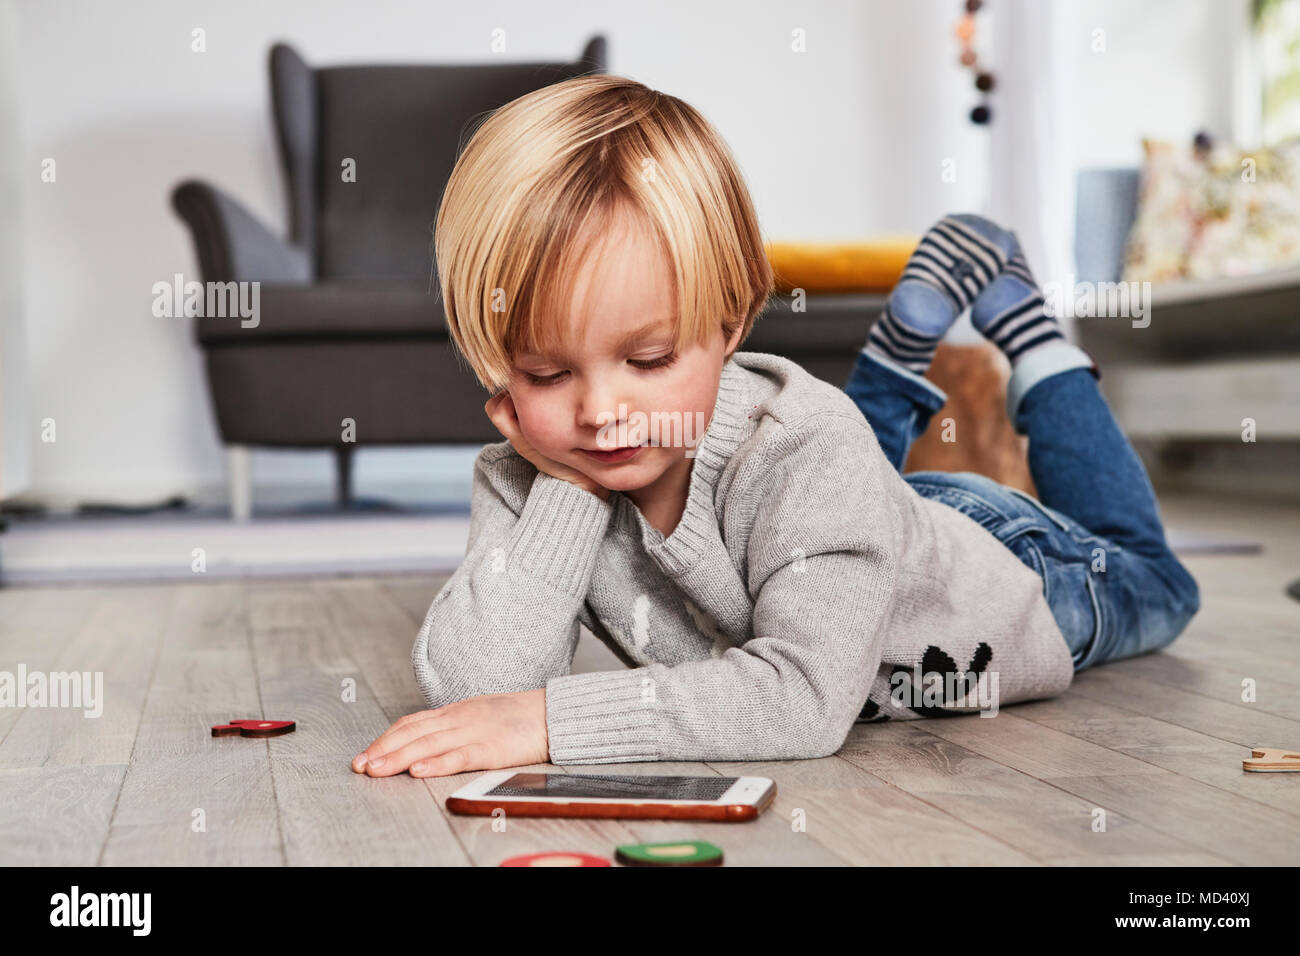 Young boy lying on floor,  using smartphone, looking at screen Stock Photo